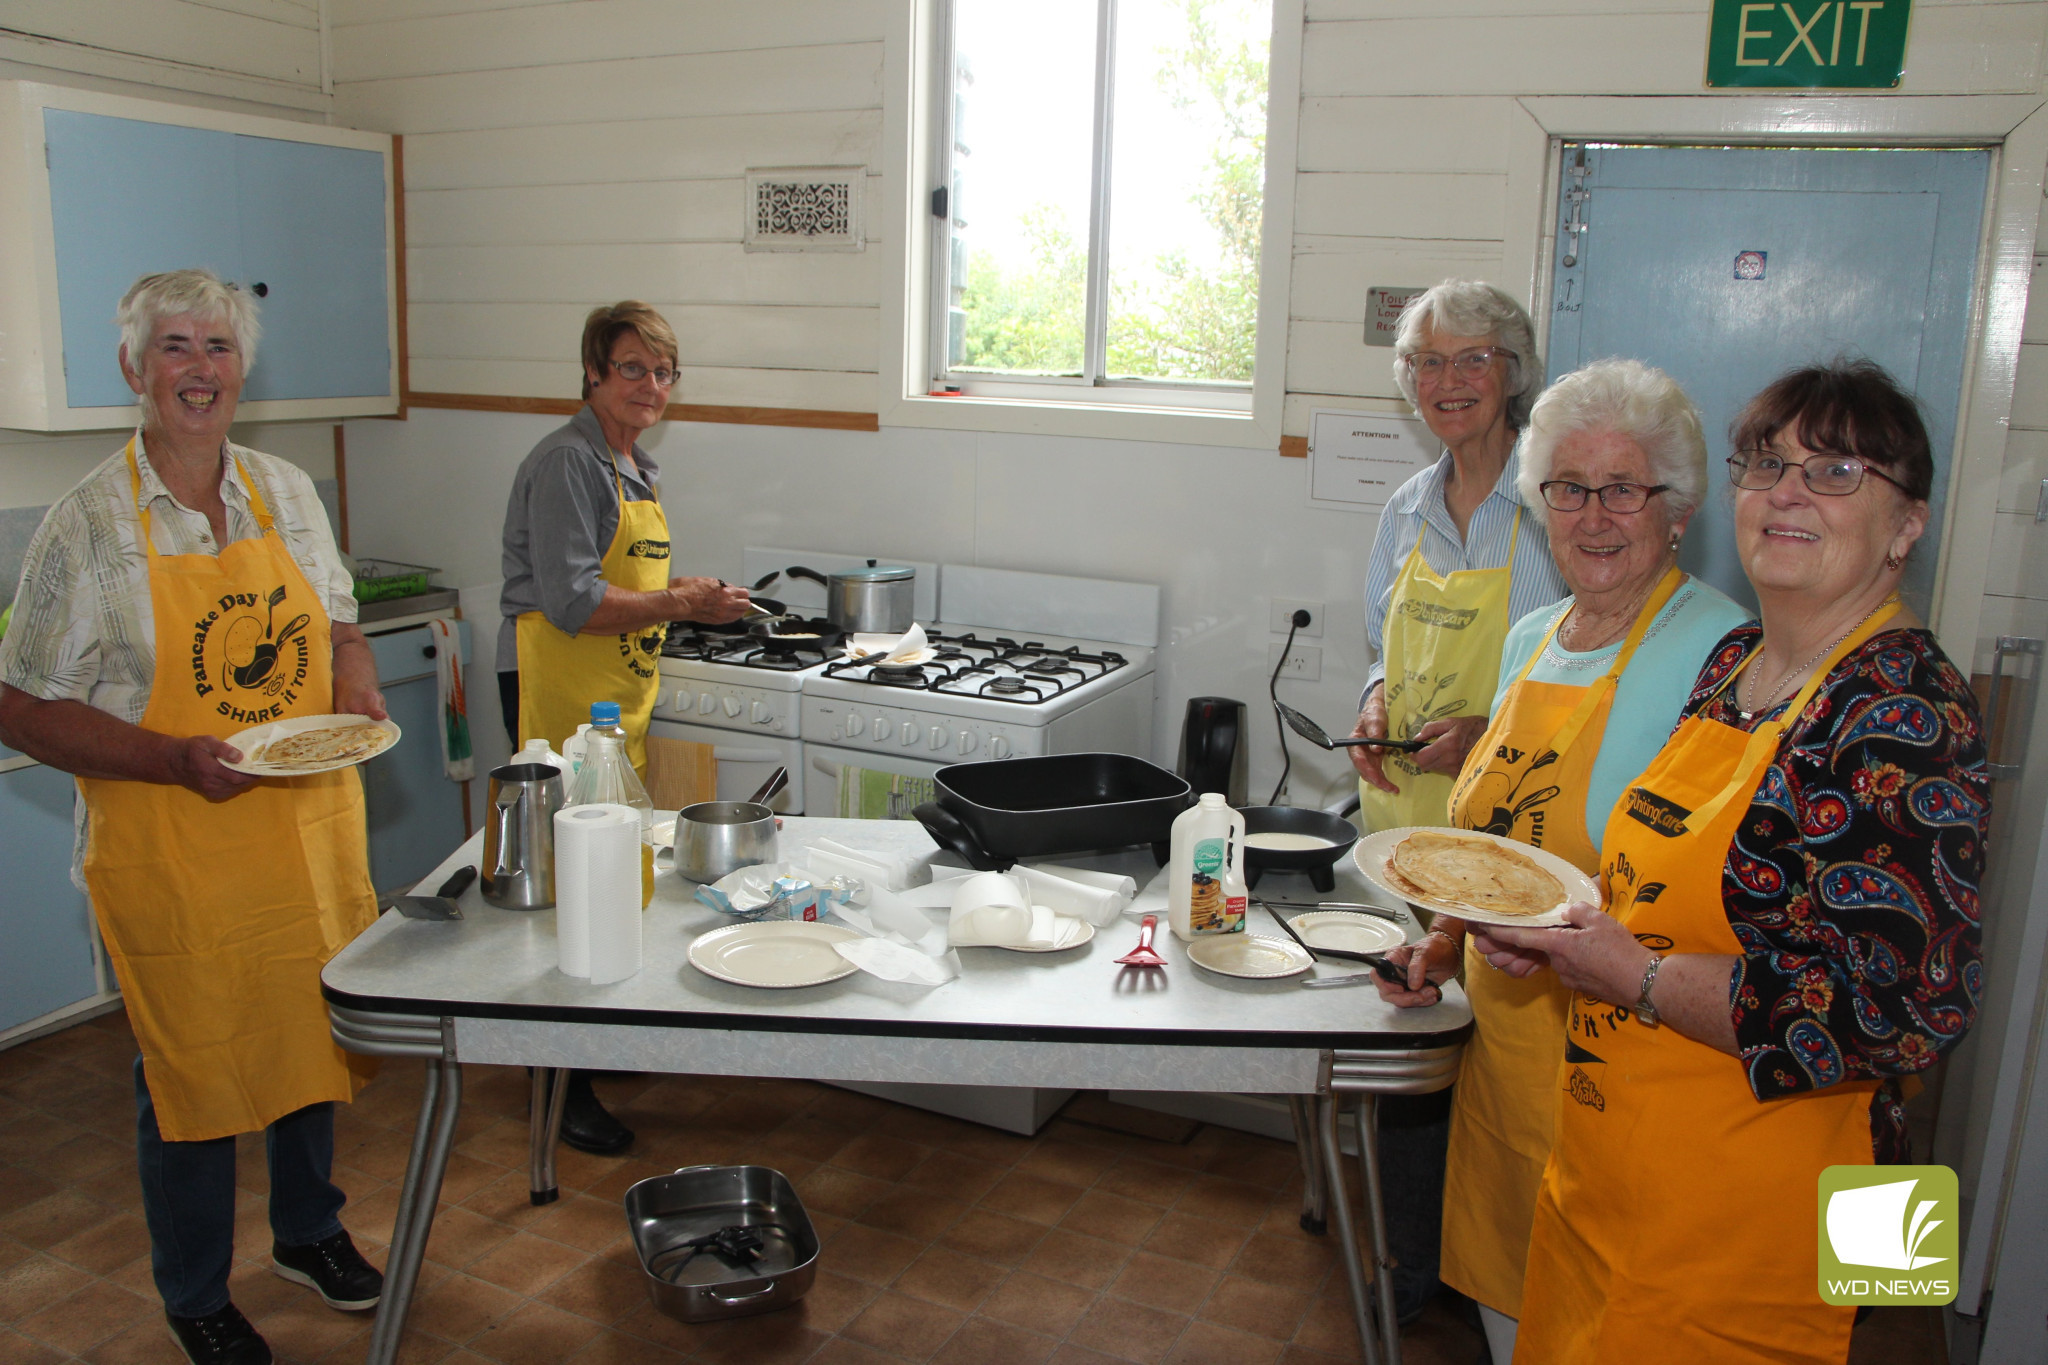 Tasty treat: Volunteers at the Mortlake Uniting Church will be serving up a delicious morning tea and lunch next week, and everyone is invited.